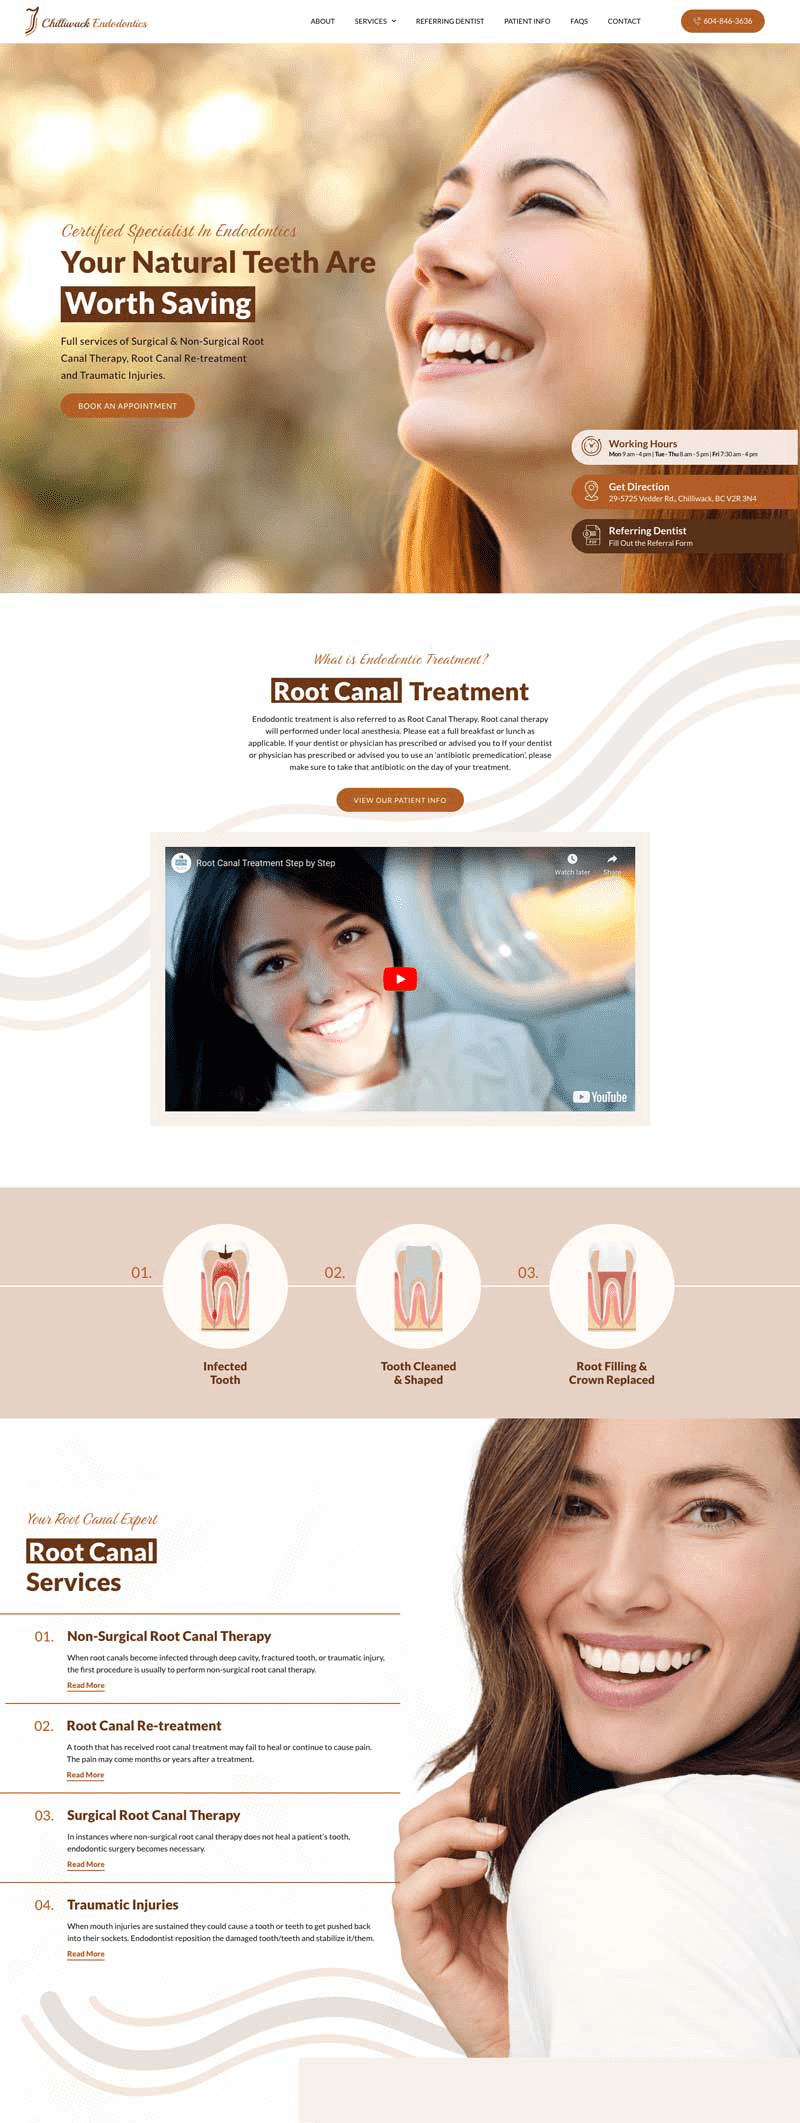 Website Redesign Of Chilliwack Endodontics Home Page Part 1